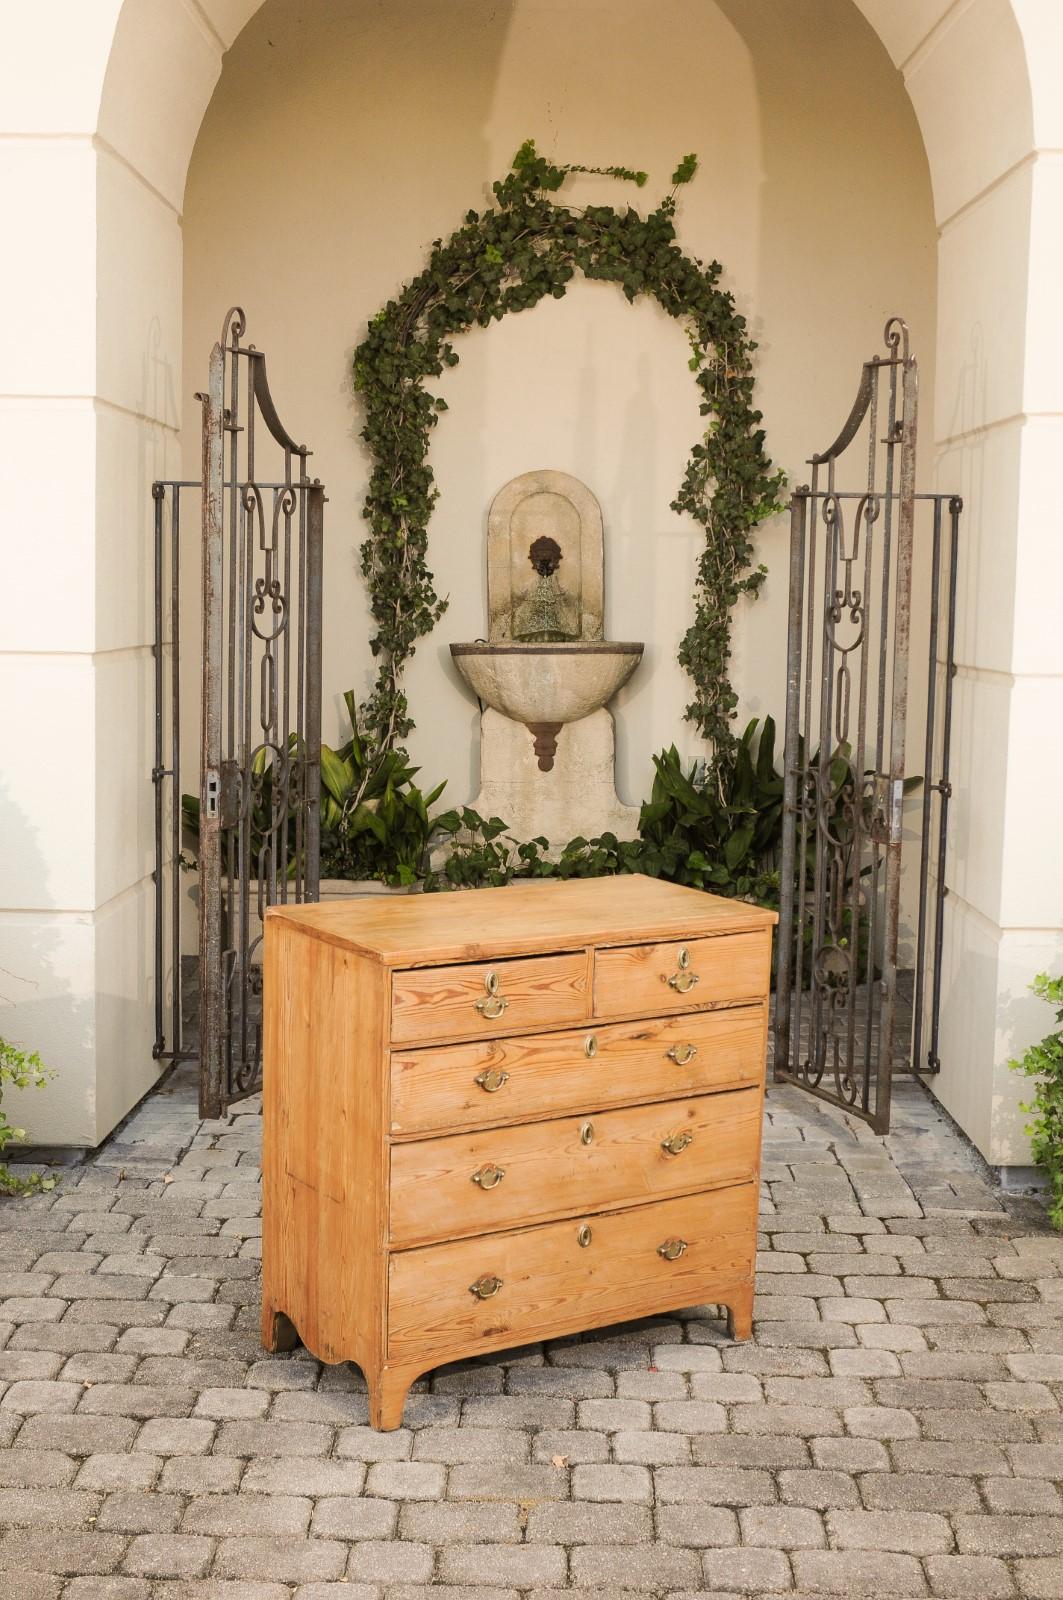 English Georgian Period 1820s Pine Five-Drawer Chest with Arched Skirt (Kiefernholz)